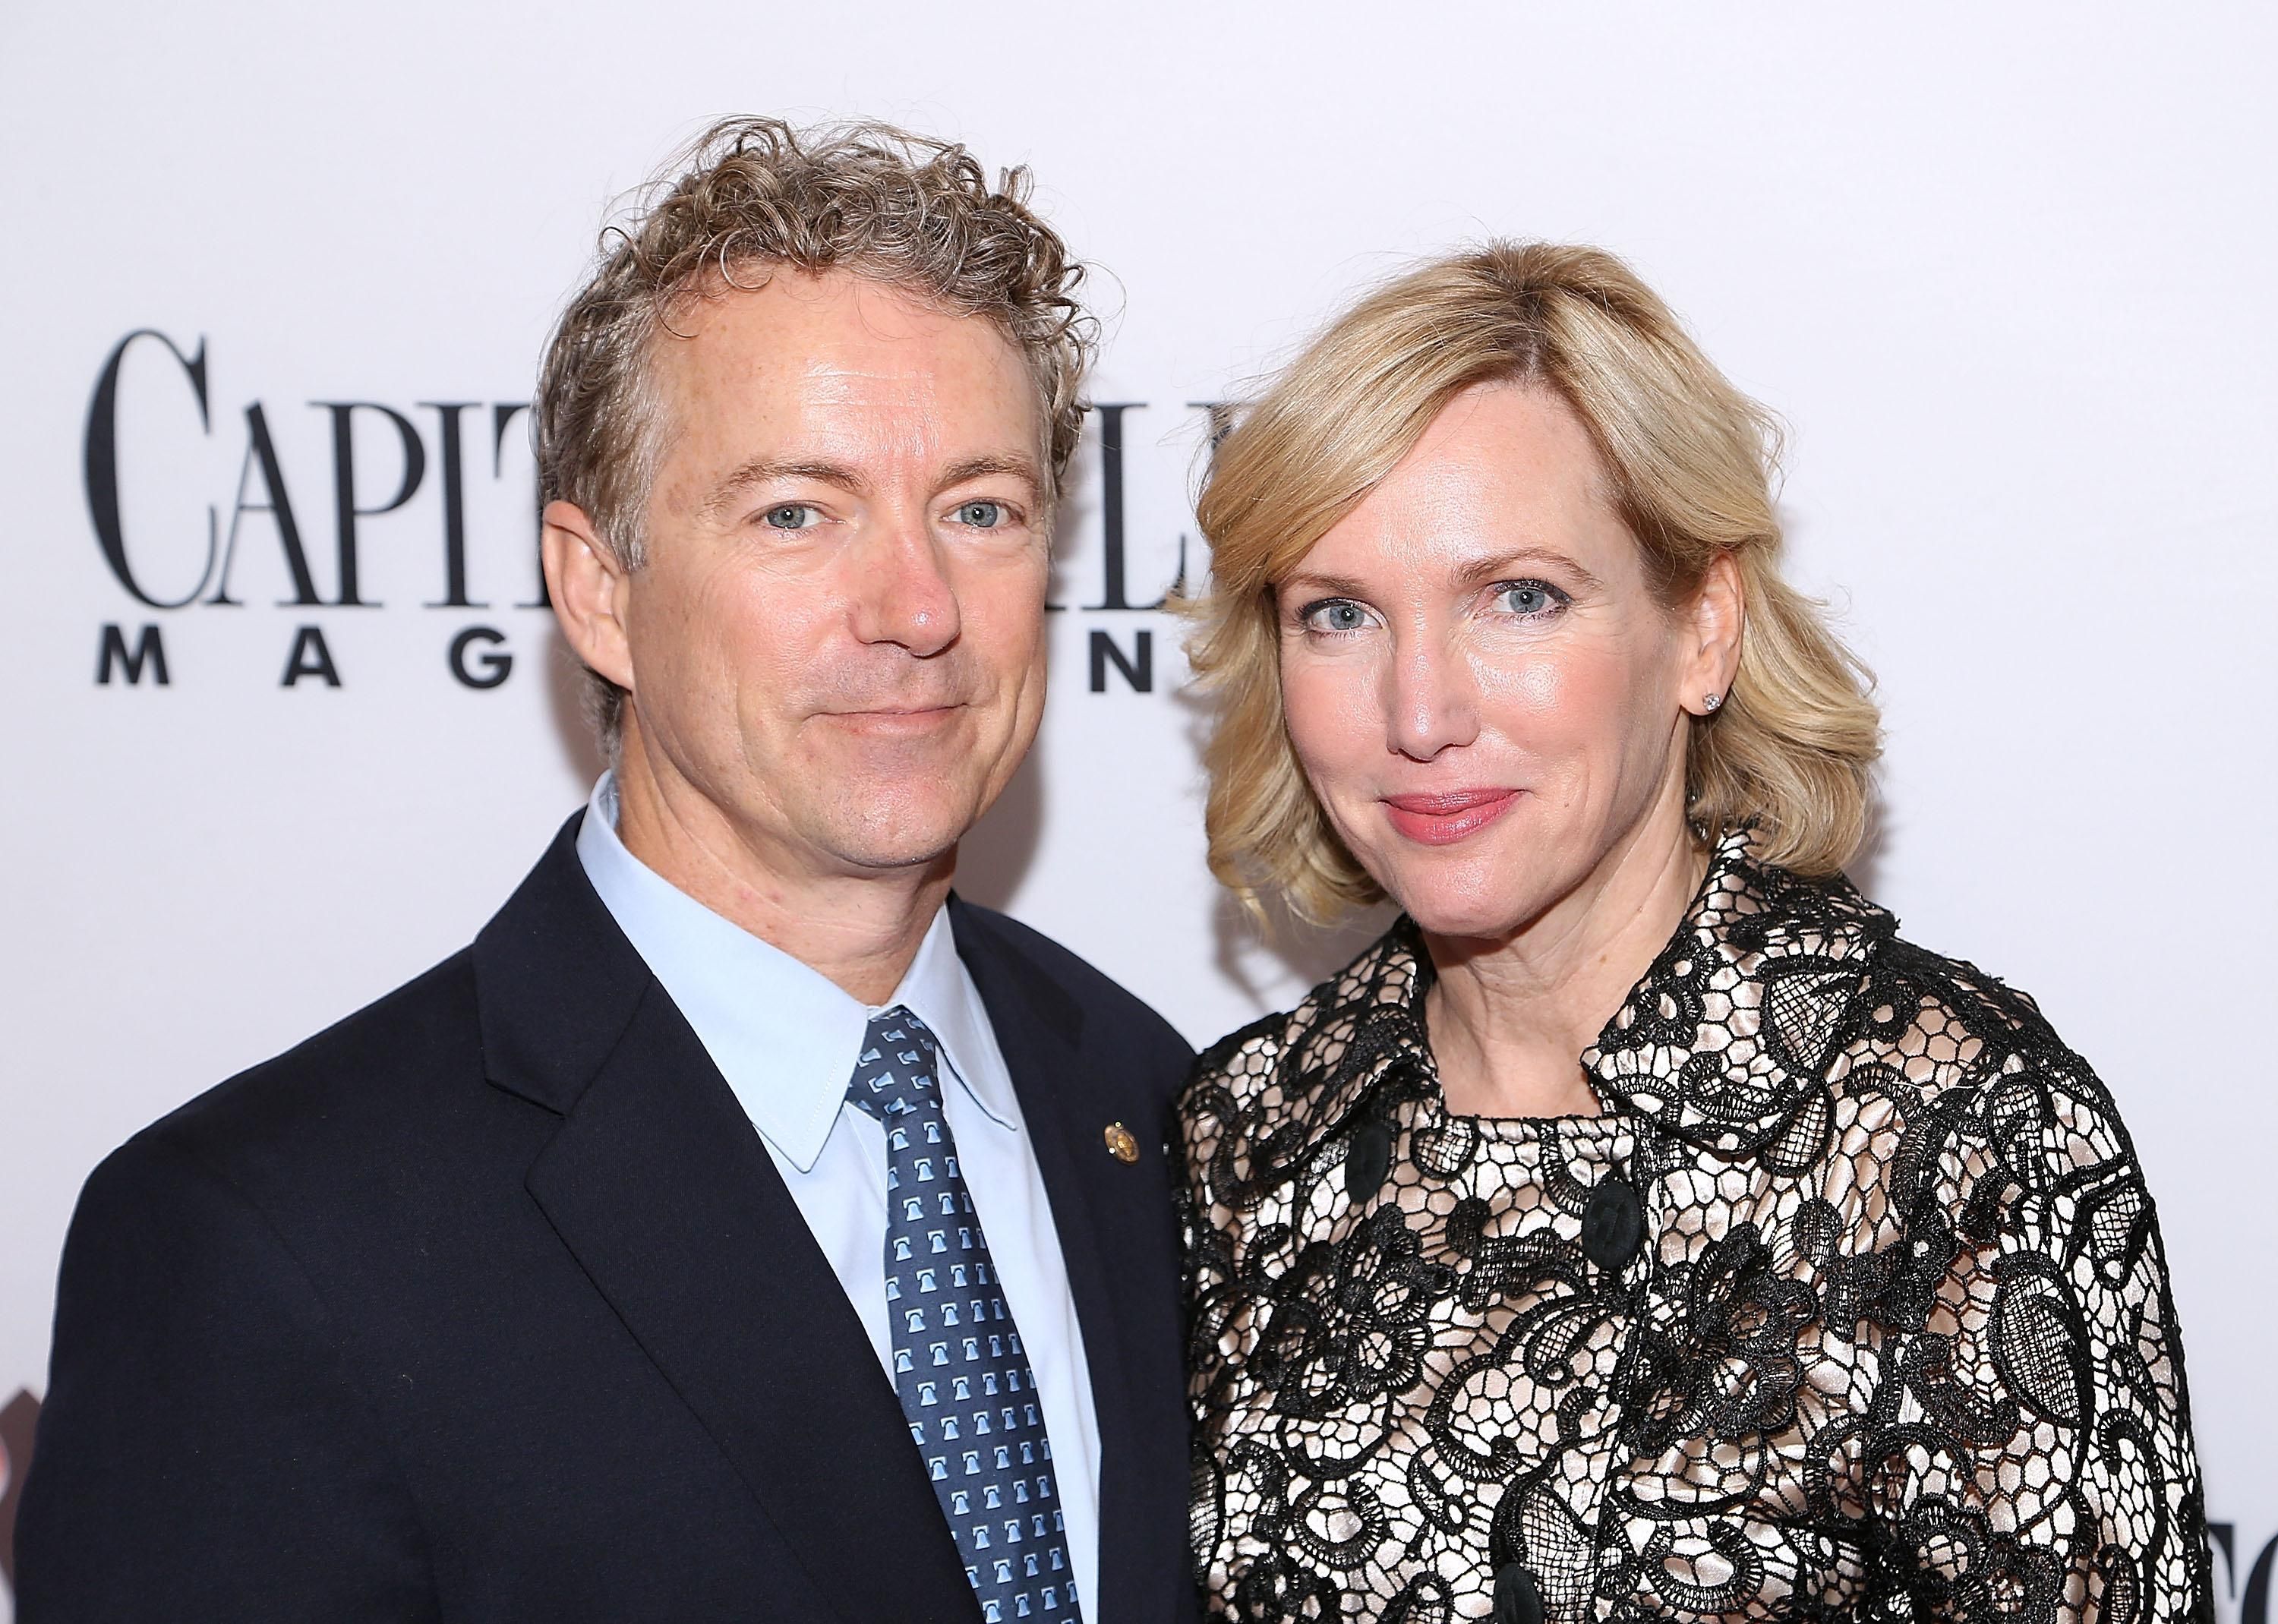 Sen. Rand Paul (R-Ky.) and his wife Kelley Paul attend a reception on January 19, 2017 in Washington, D.C. (Photo: Paul Morigi/Getty Images for Capitol File Magazine)